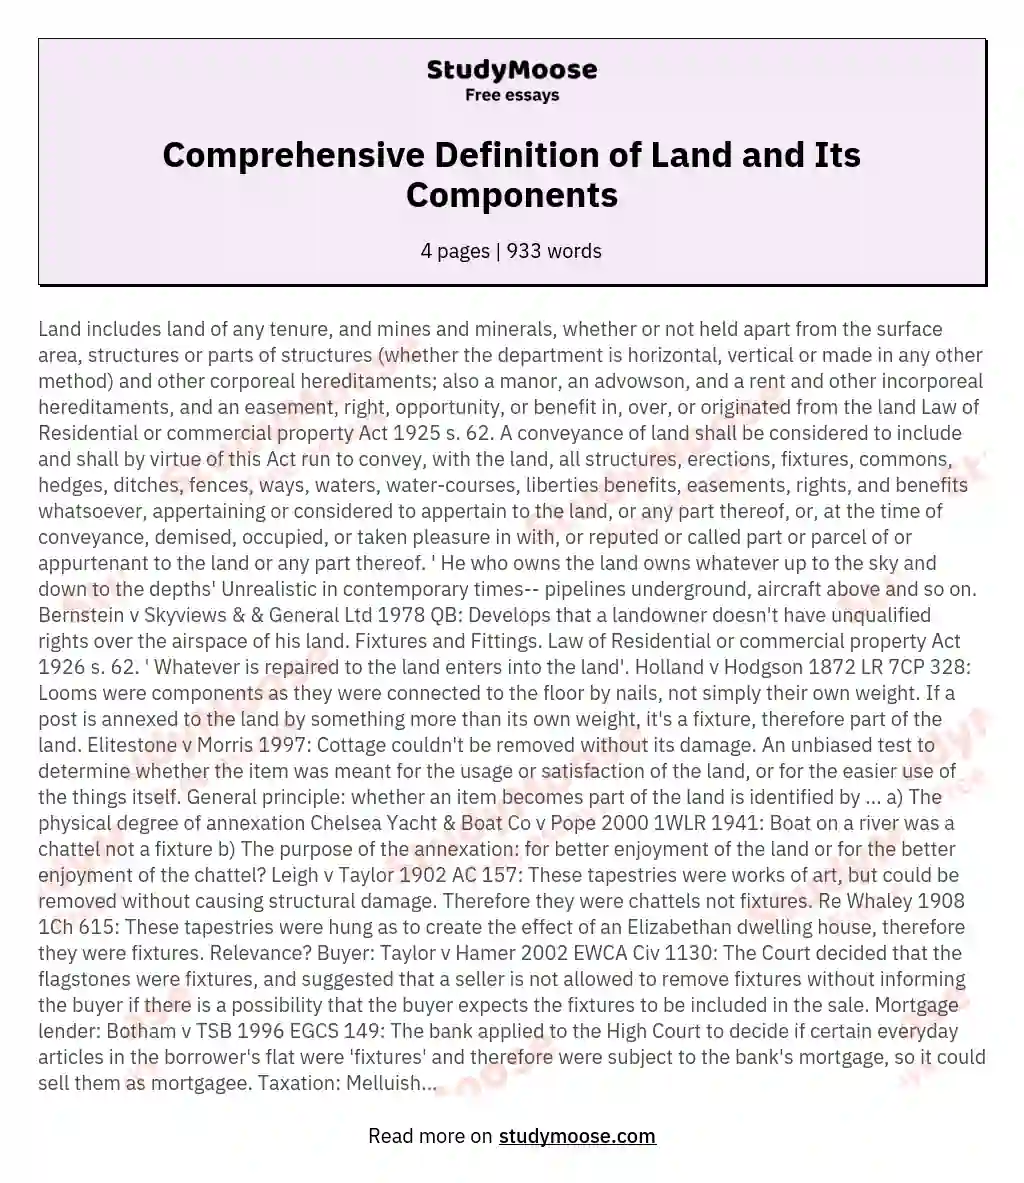 Comprehensive Definition of Land and Its Components essay